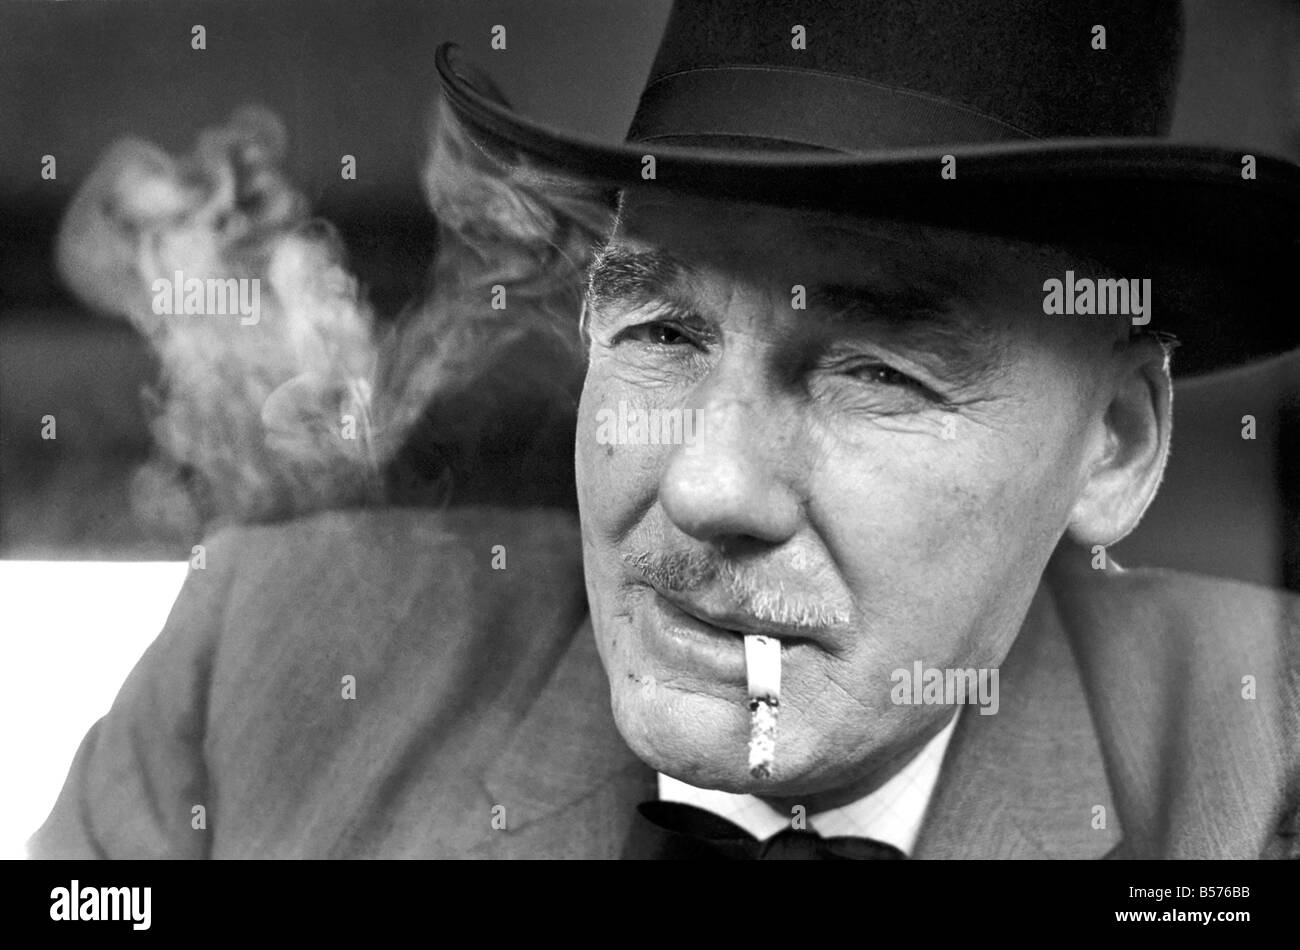 That mean Cowboy look. Lot Beedon 63 years old miner goes looking for the sheriff of Wombwell, smoking a cigarette. Nov. 1969 Z1 Stock Photo